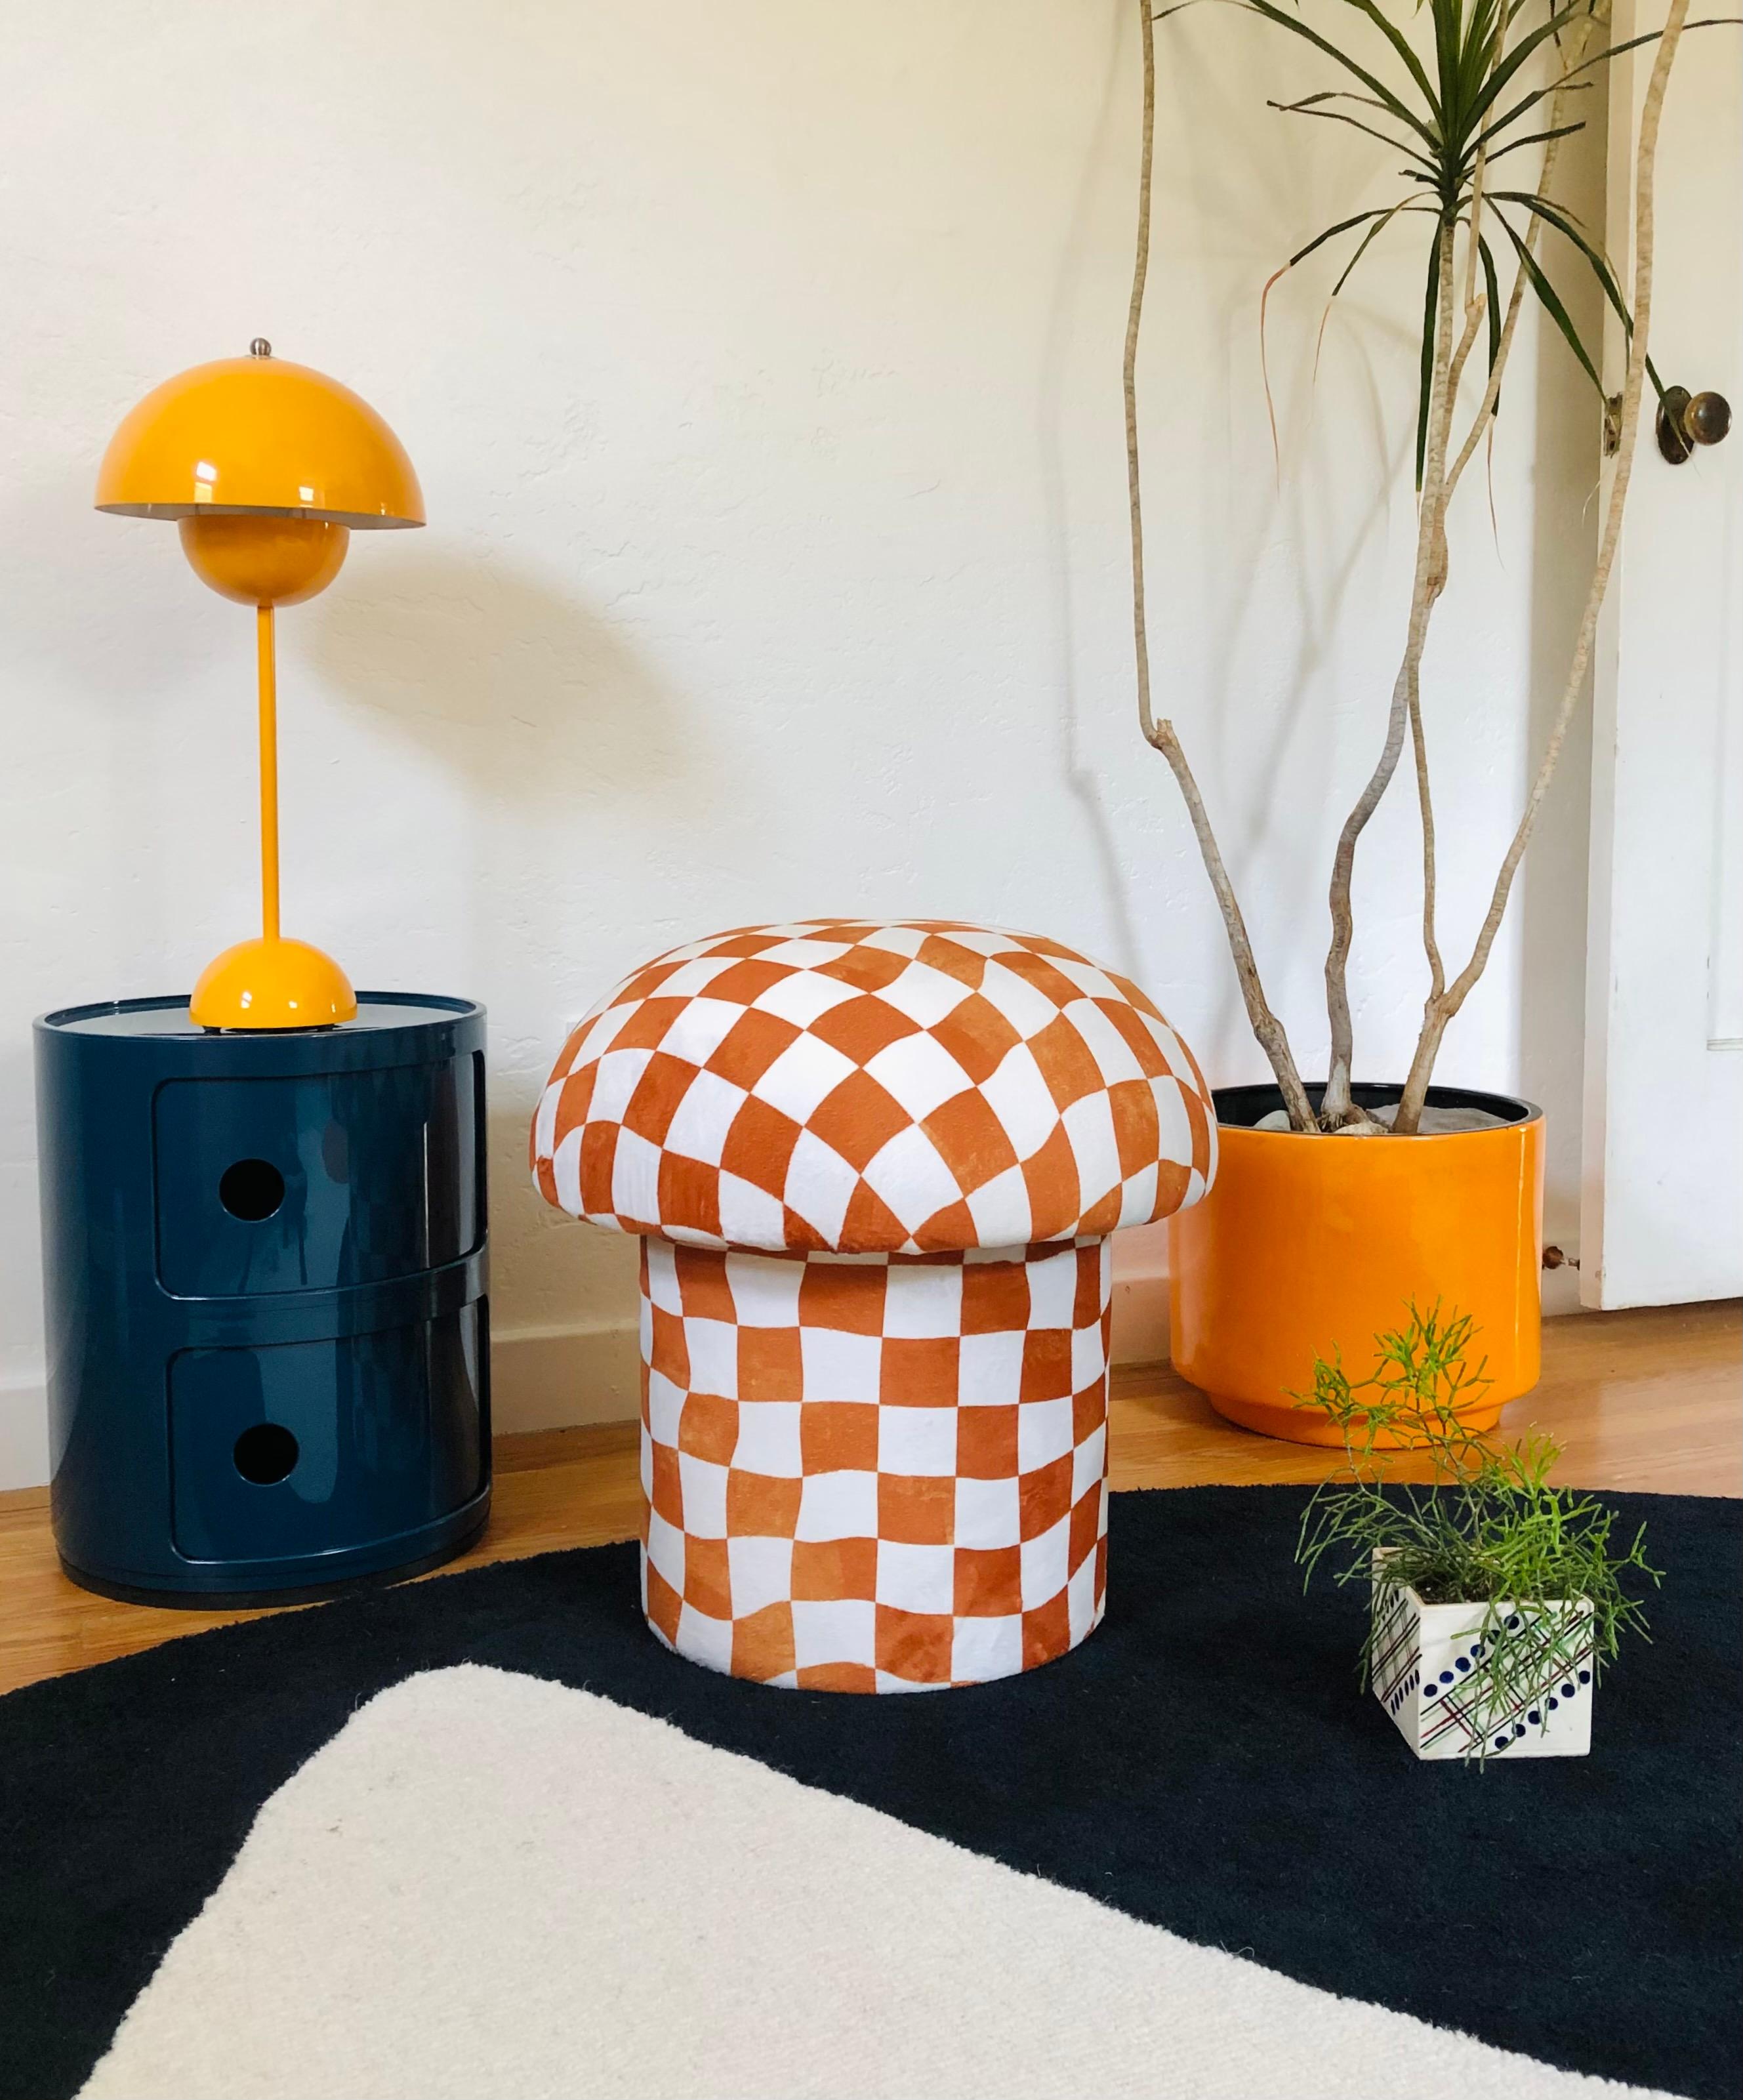 A handmade mushroom shaped ottoman, upholstered in a white and burnt orange warped checkerboard velvet fabric. Perfect for using as a footstool or extra occasional seating. A comfortable cushioned seat and sculptural accent piece.
Mushroom ottomans